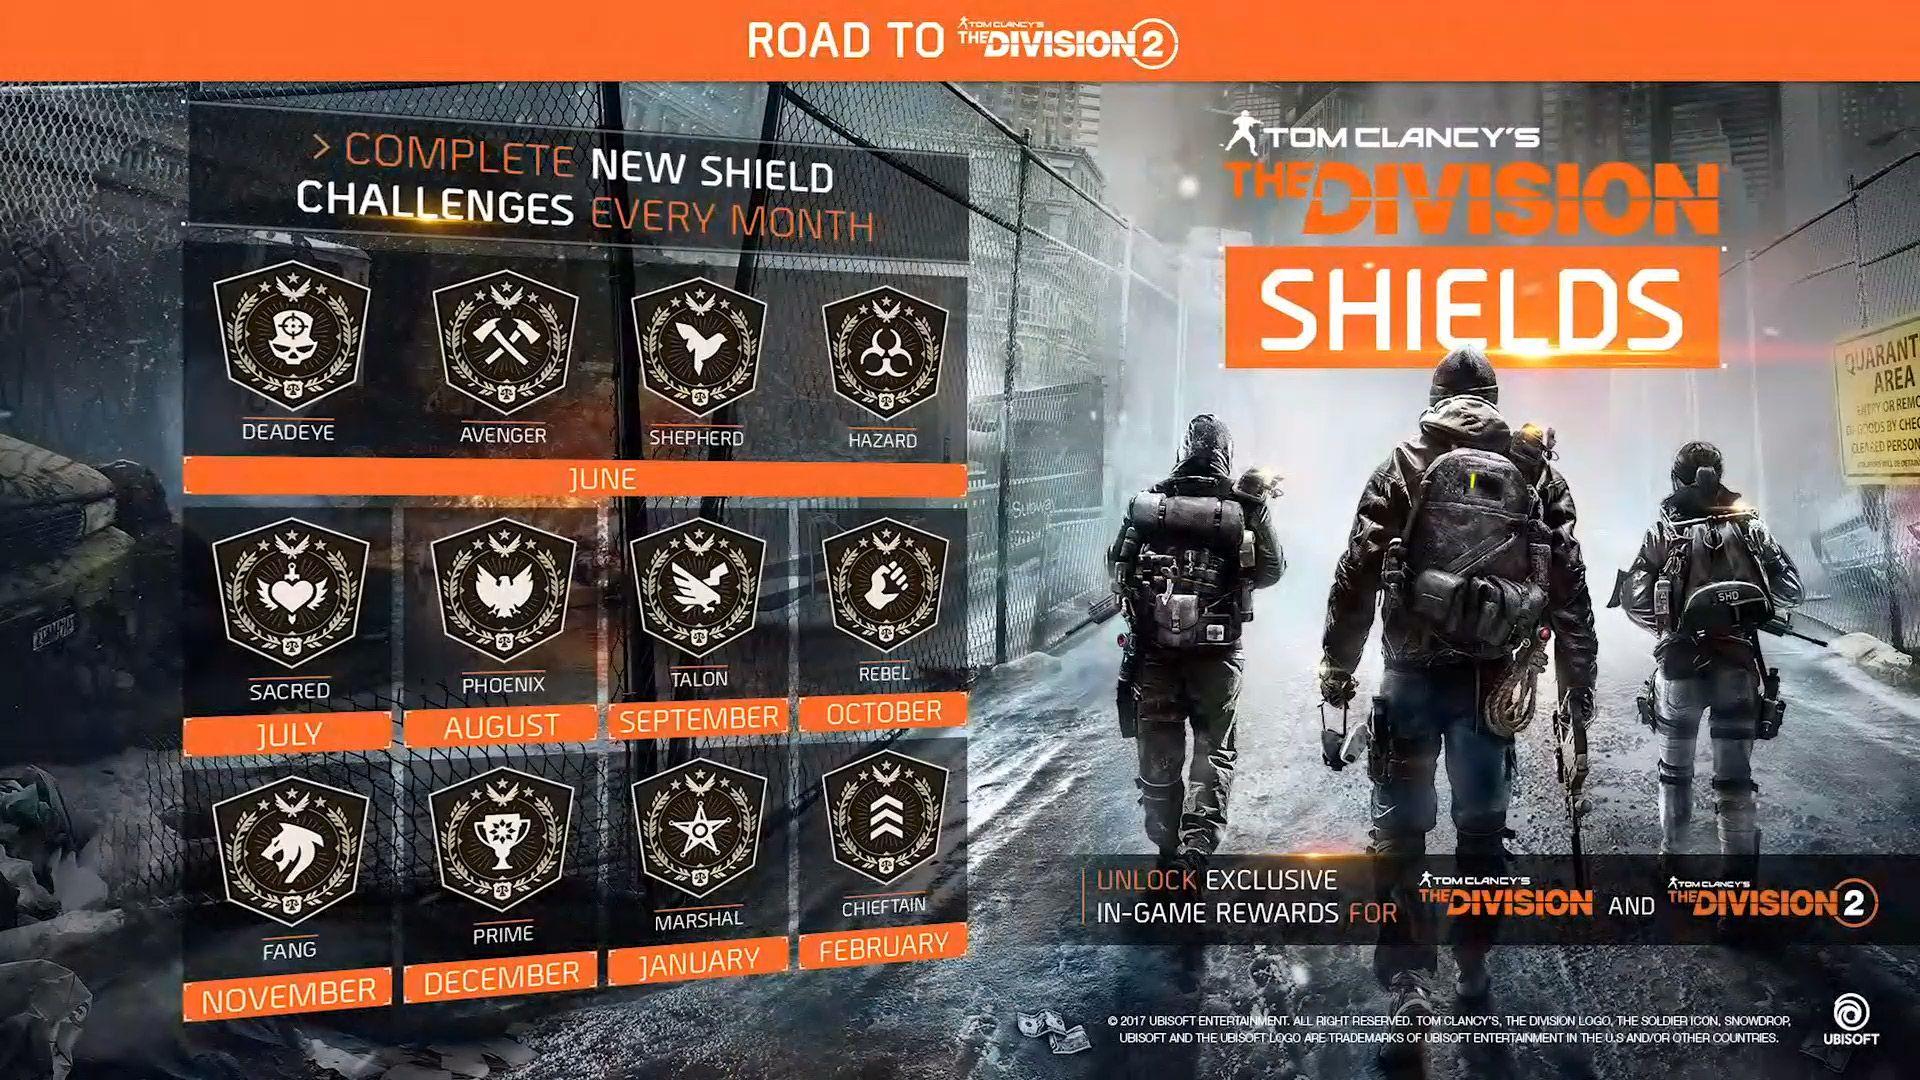 The Division Phoenix Shield Logo - The Division Update 1.8.2: New Shield Challenges Every Month [Update ...